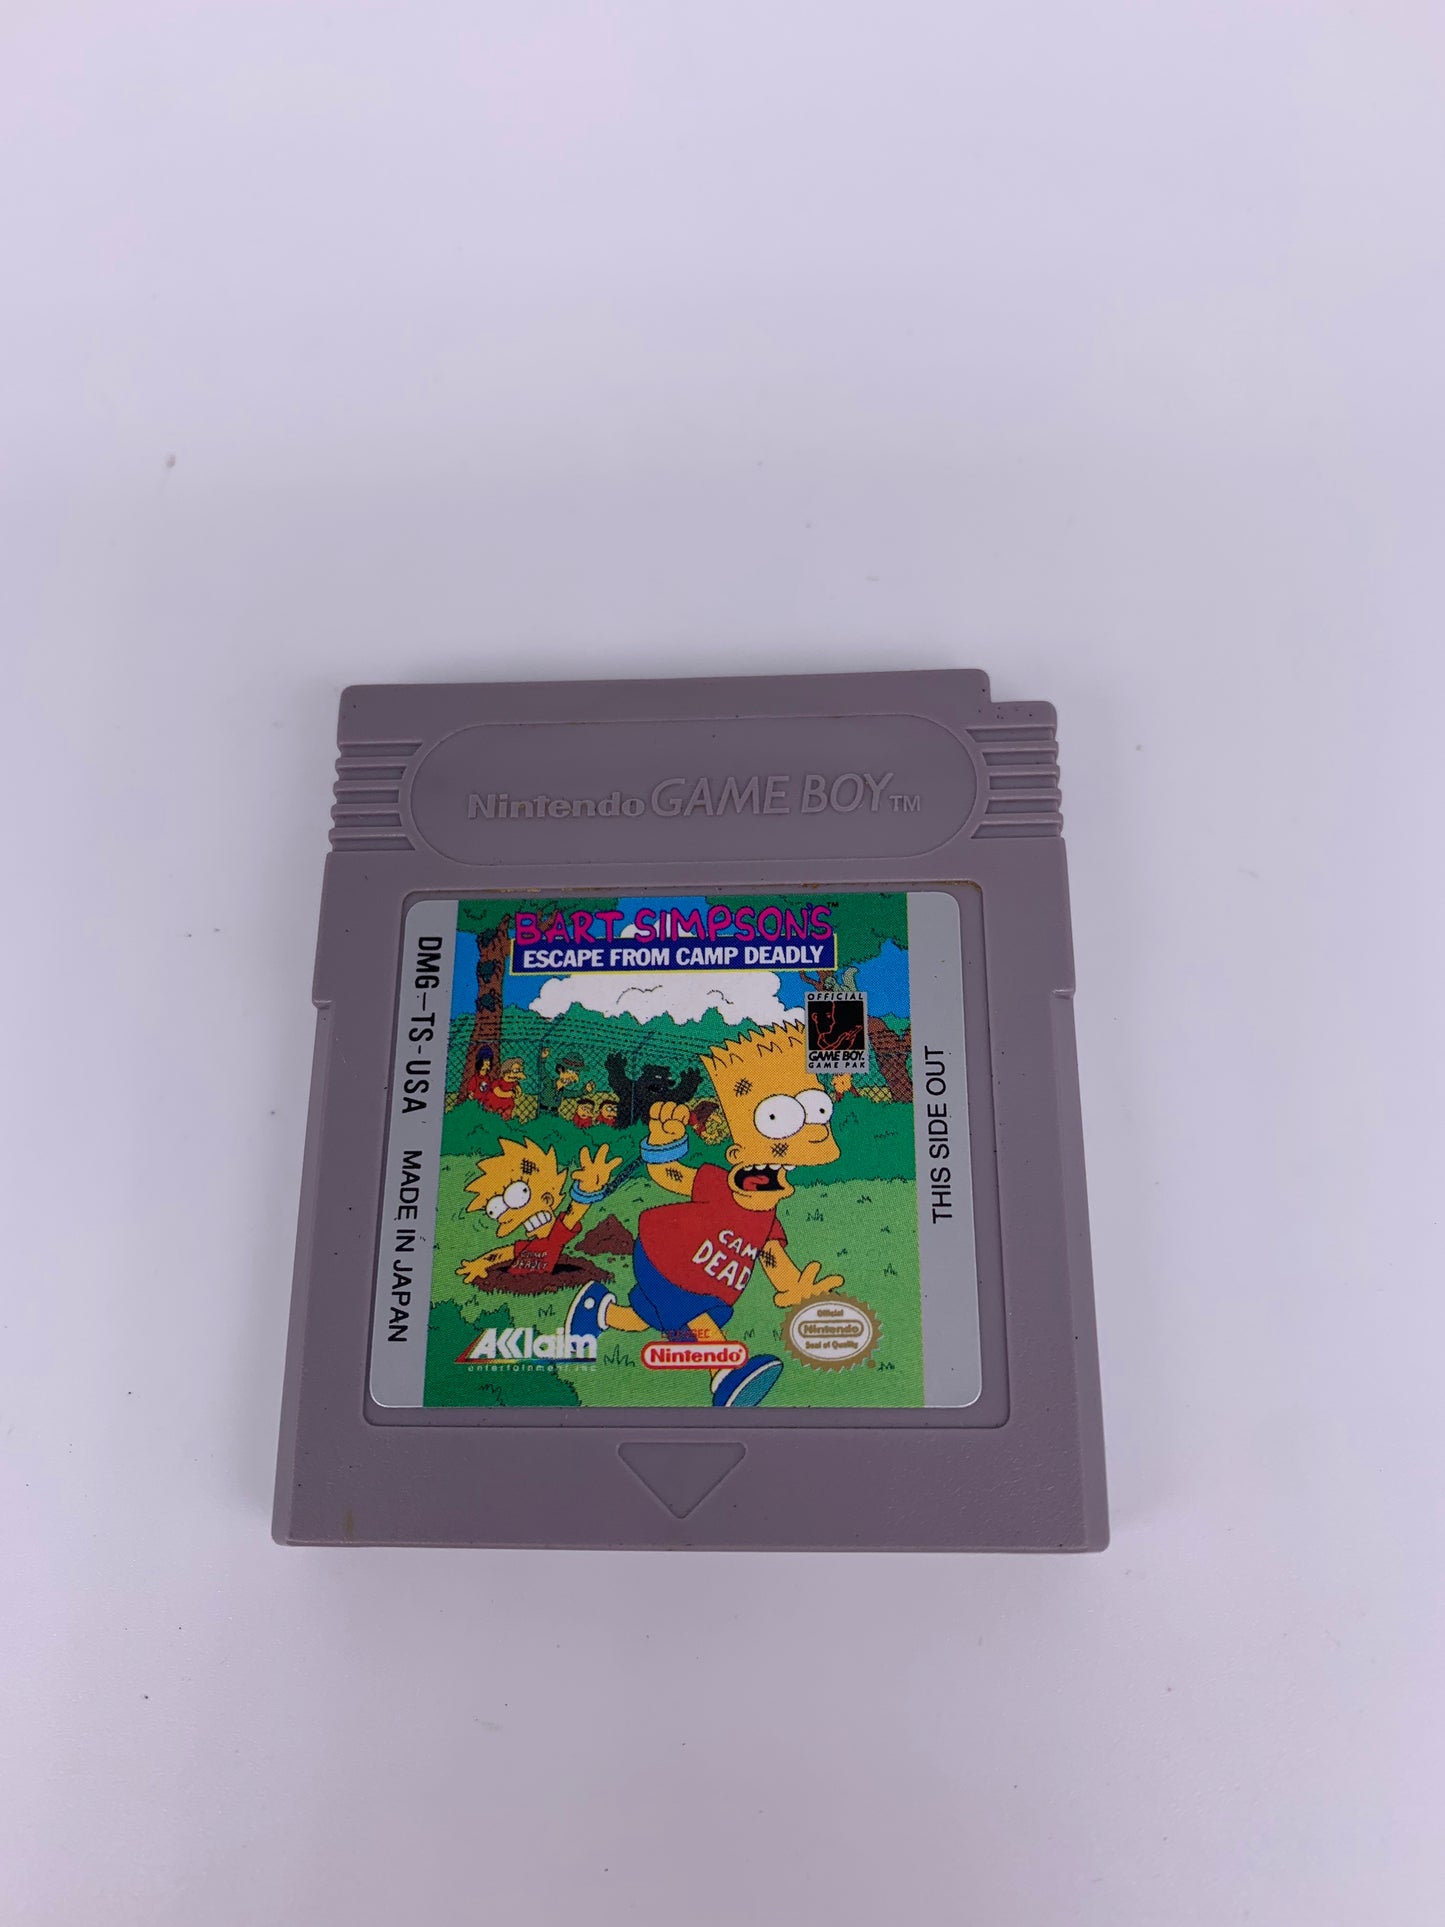 PiXEL-RETRO.COM : GAME BOY GAMEBOY (GB) GAME NTSC BART SIMPSONS ESCAPE FROM CAMP DEADLY